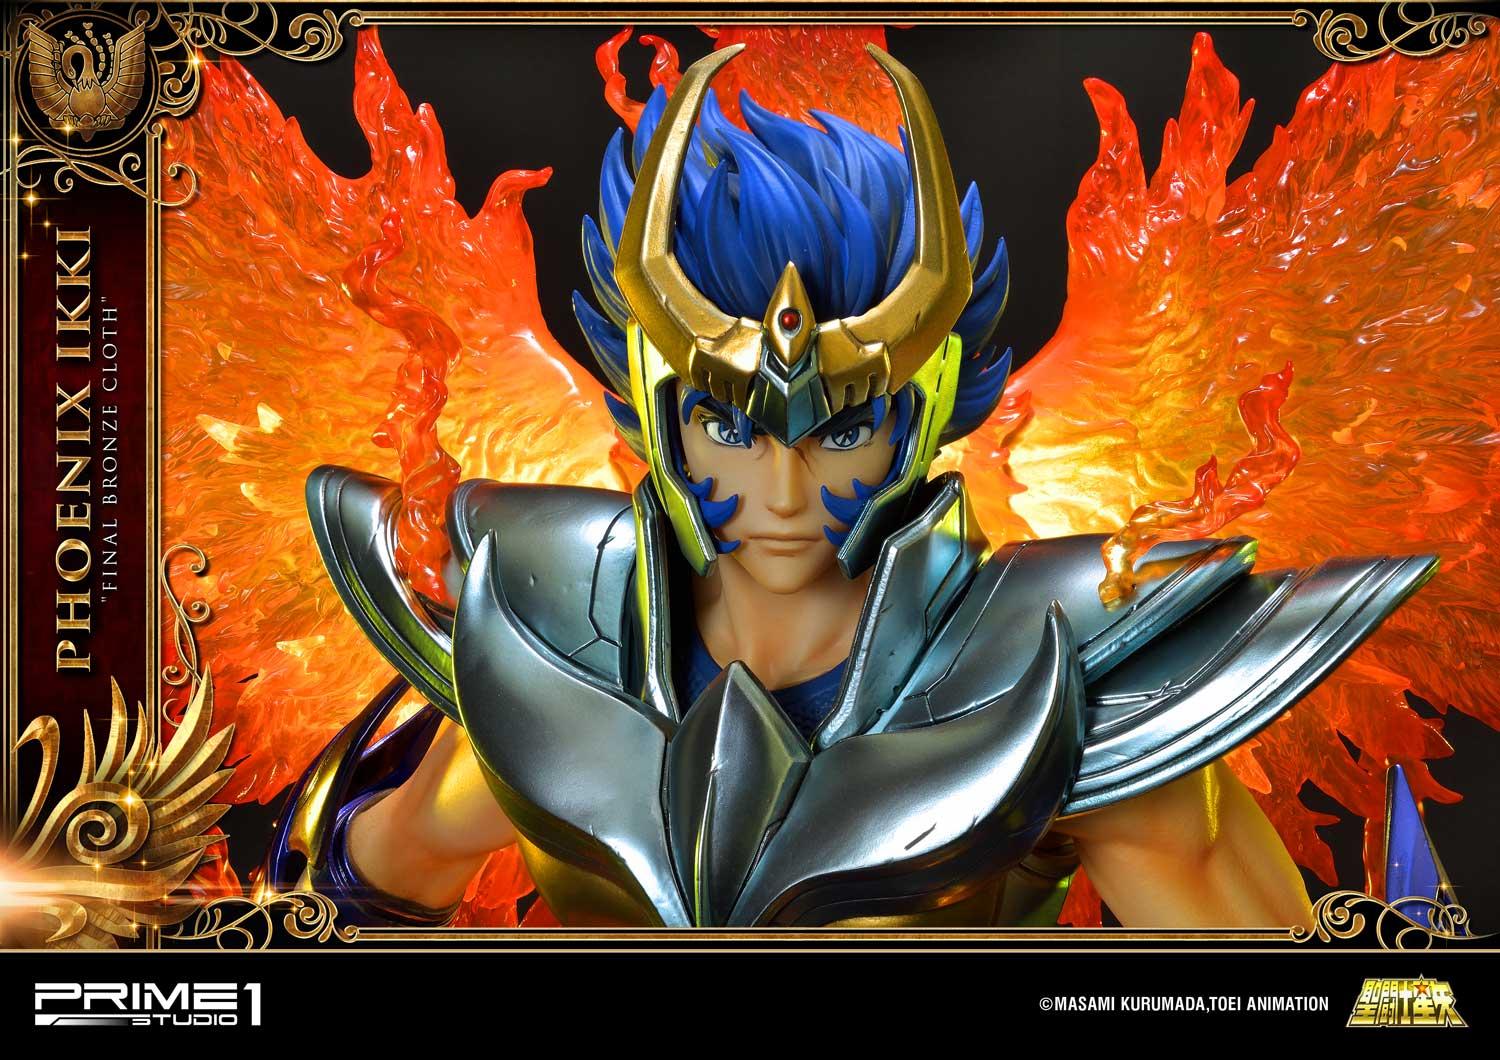 Saint Seiya Knights of the Zodiac Ikki Phoenix Hardcover Journal for Sale  by The Fit